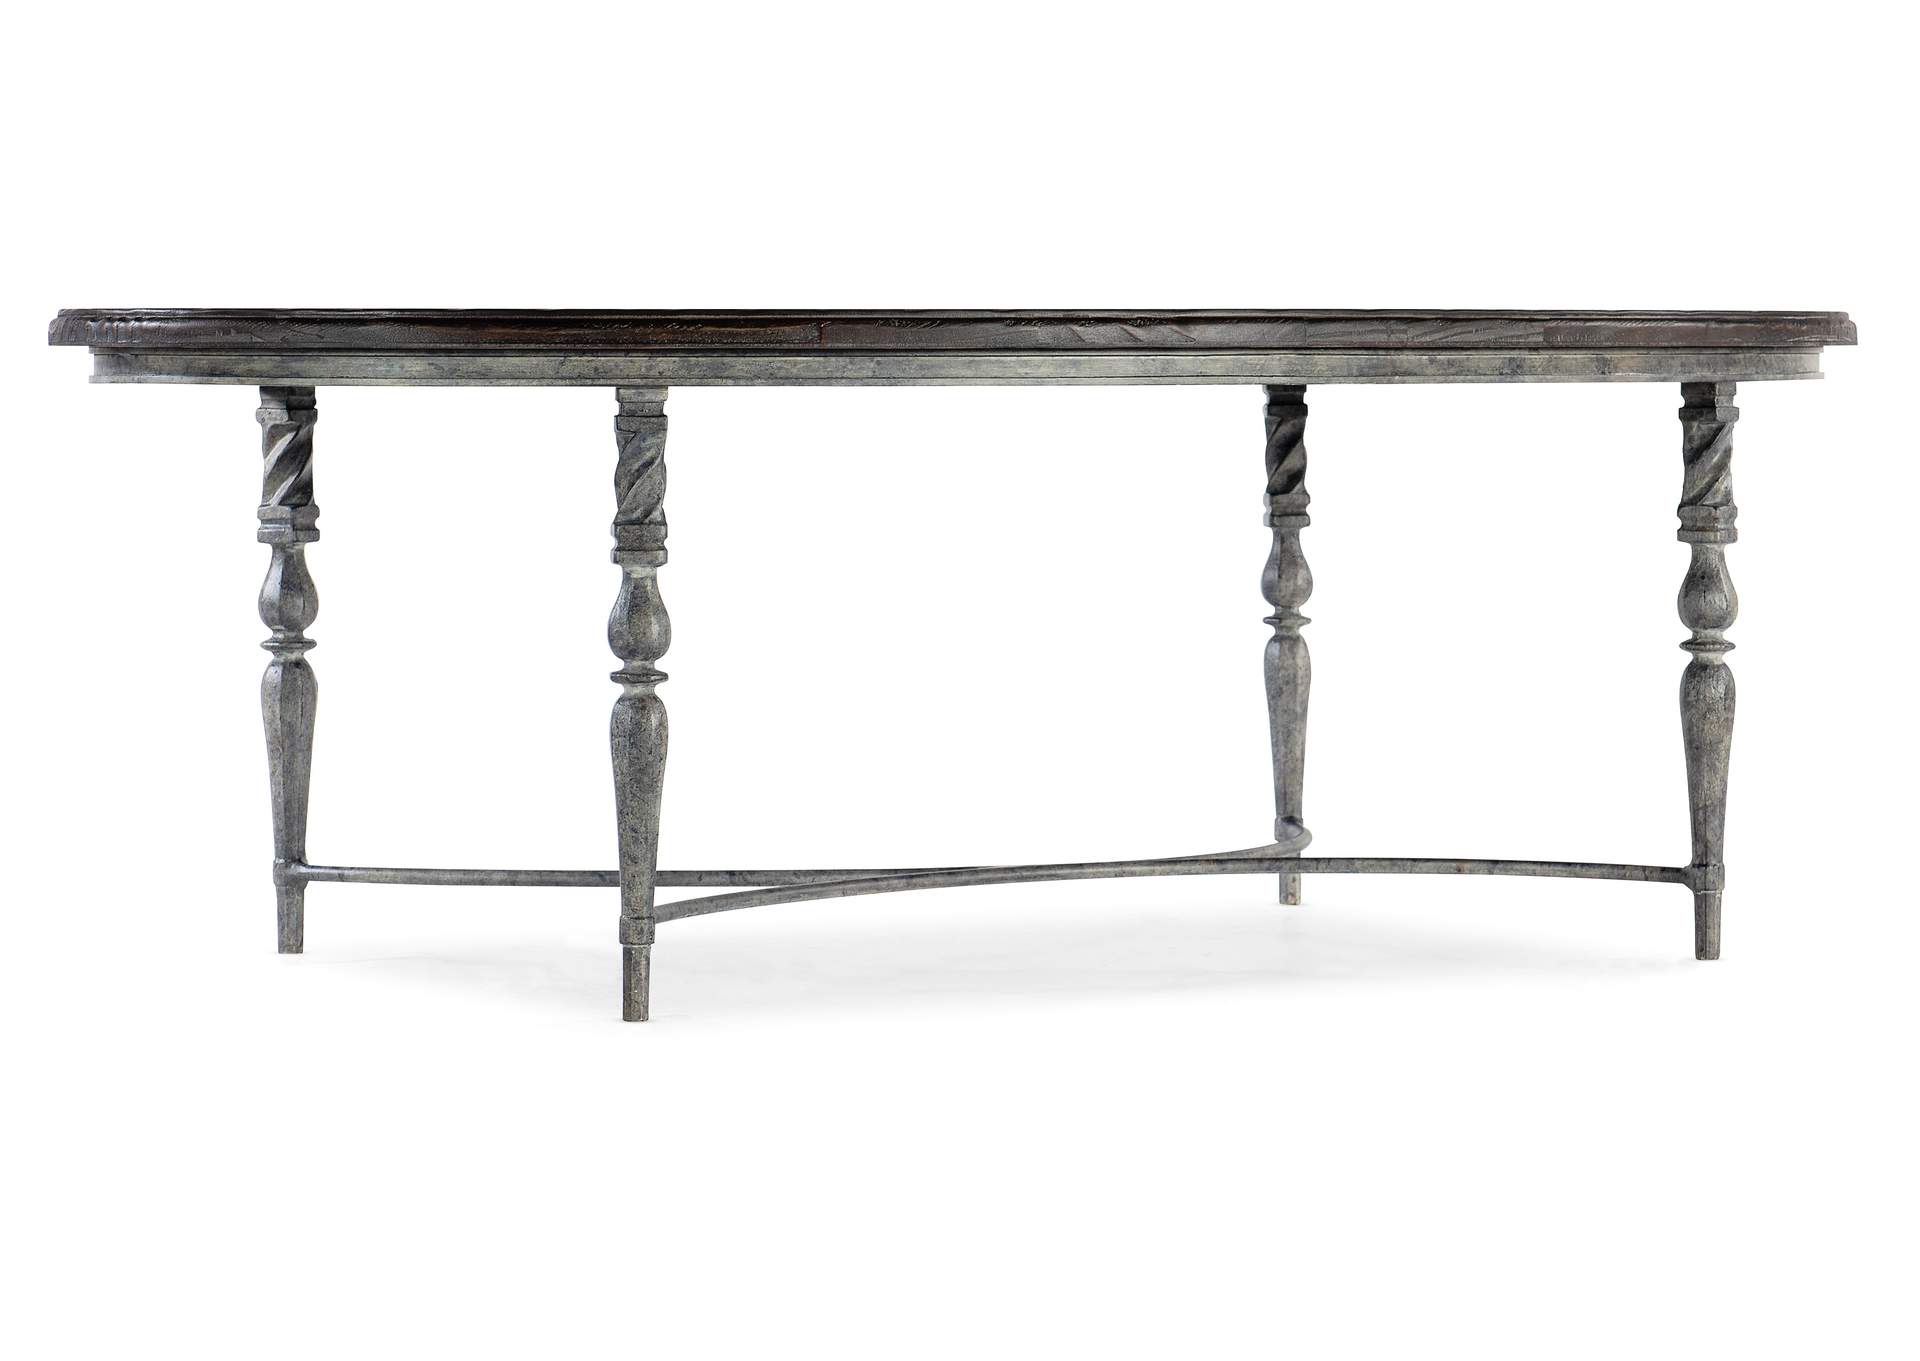 Traditions Oval Cocktail Table,Hooker Furniture